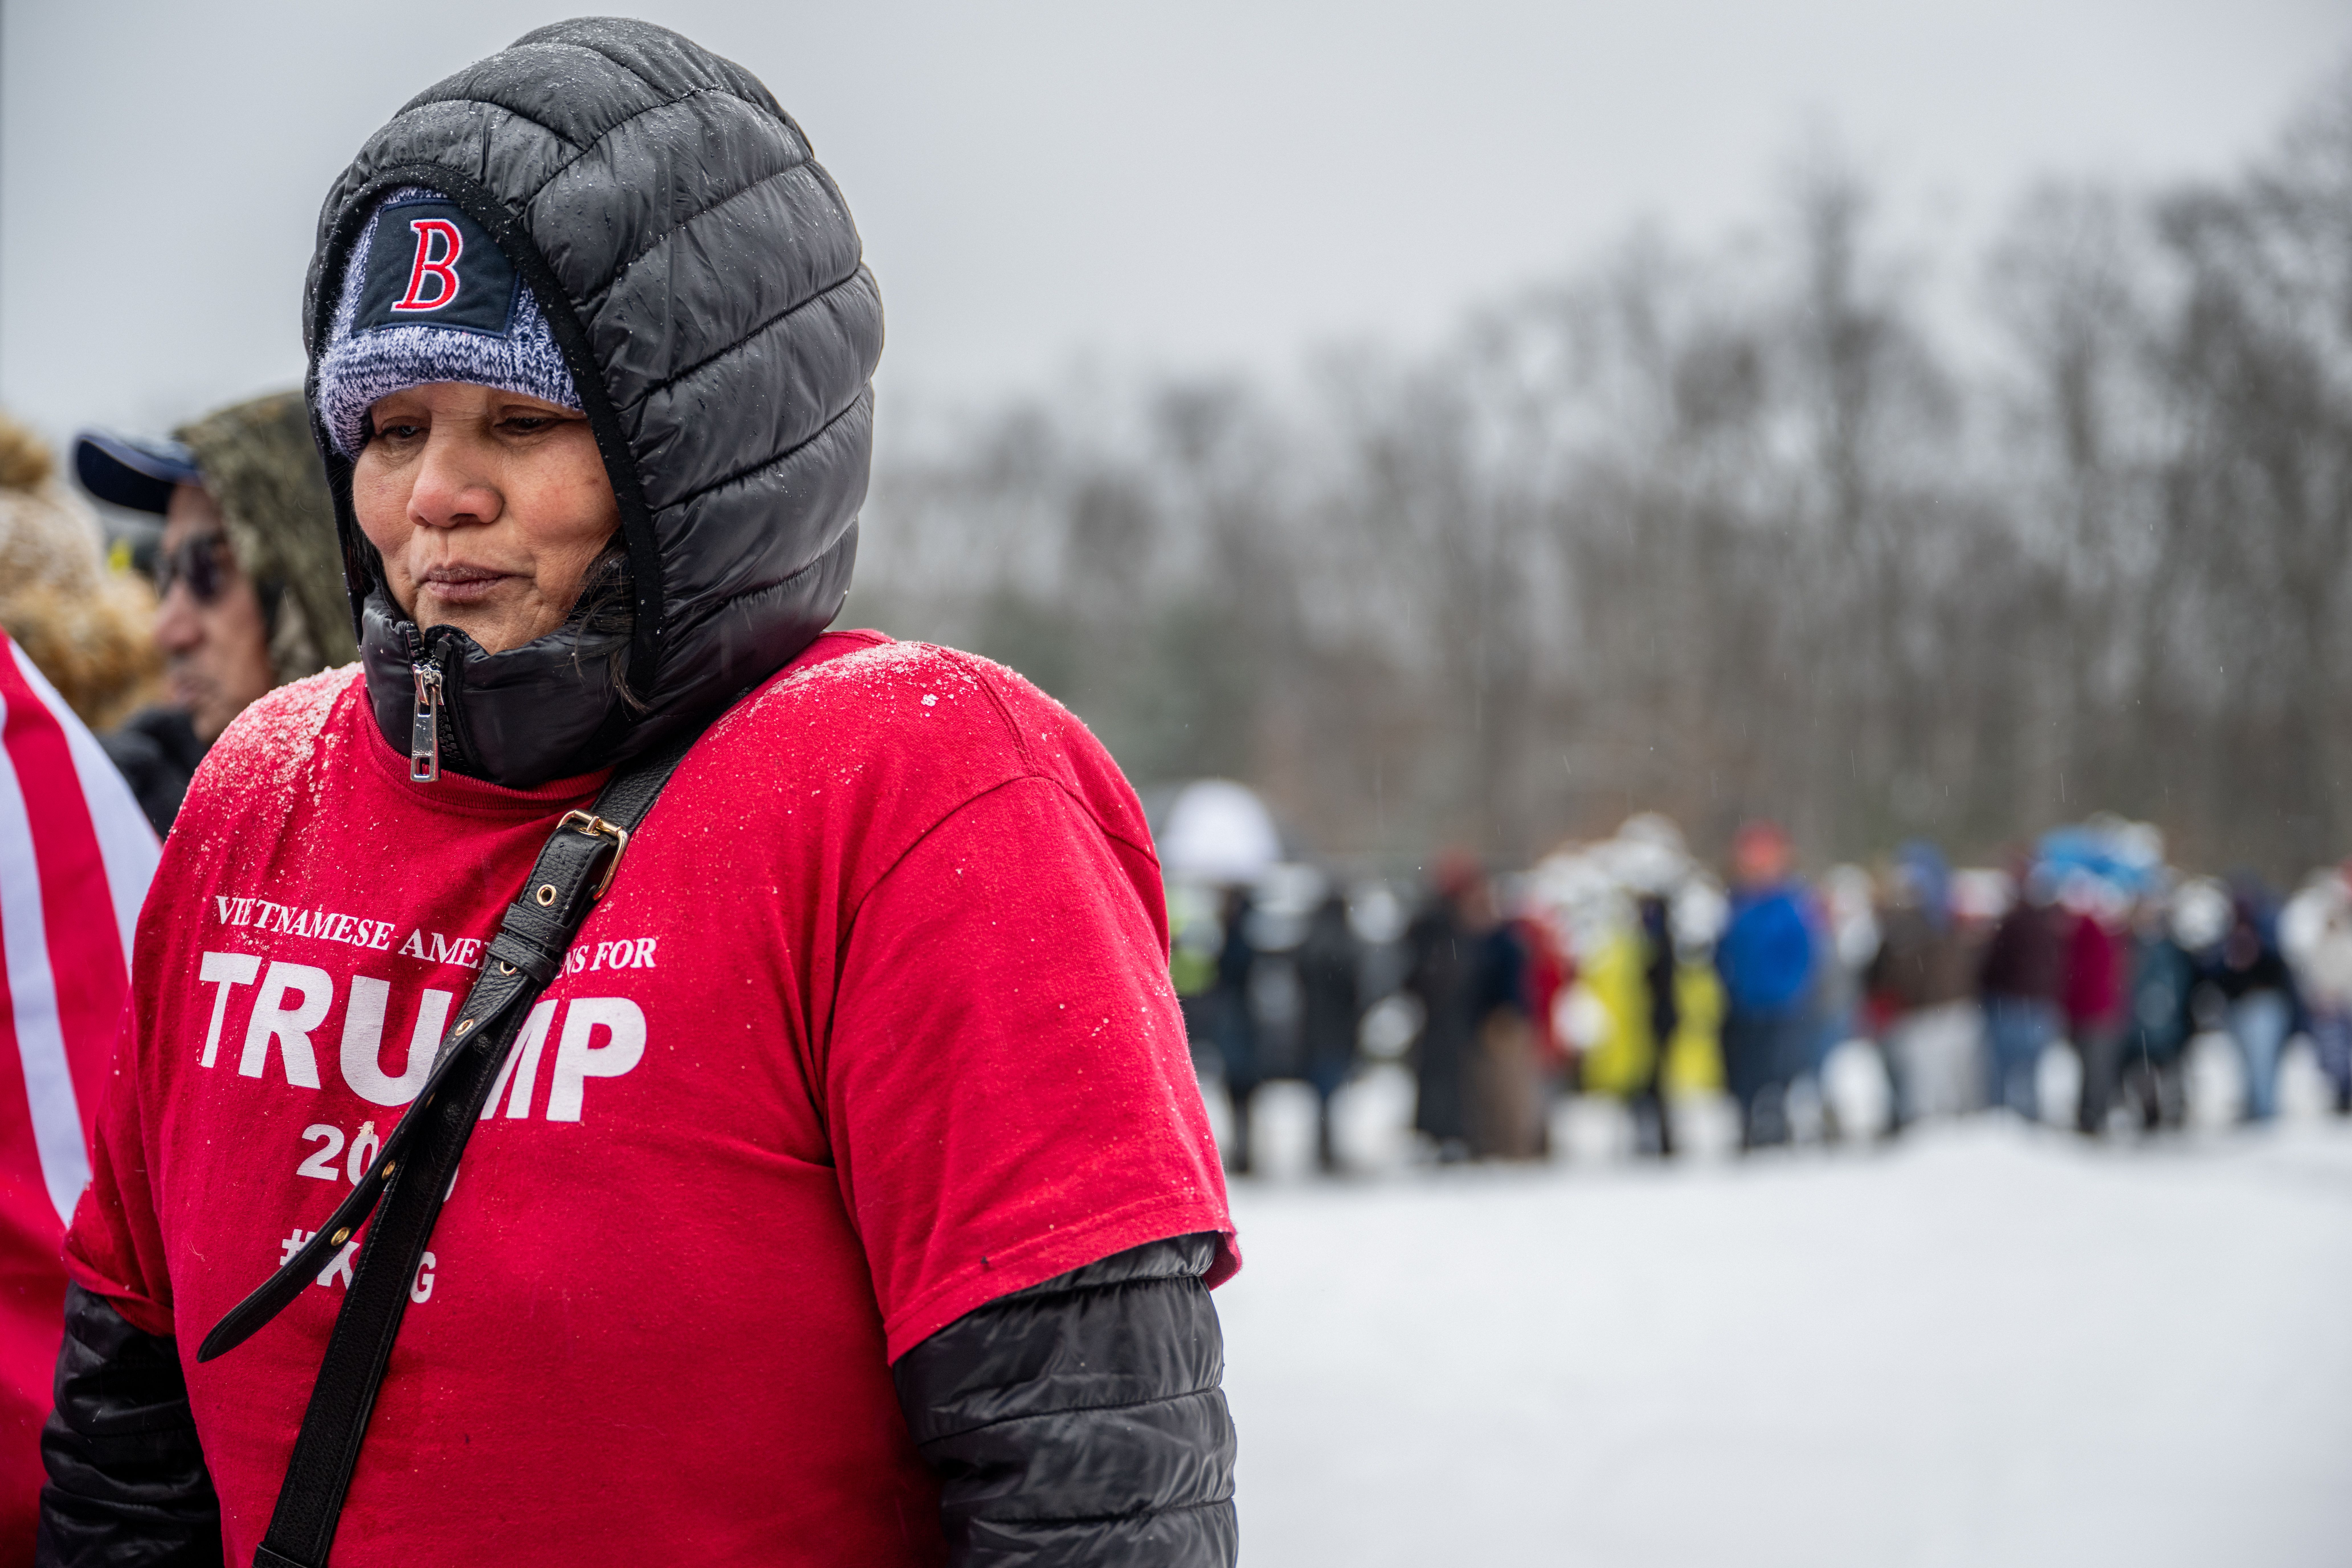 A supporter waits in line ahead of a rally for Republican presidential candidate, former U.S. President Donald Trump at the Atkinson Country Club on January 16, 2024 in Atkinson, New Hampshire.